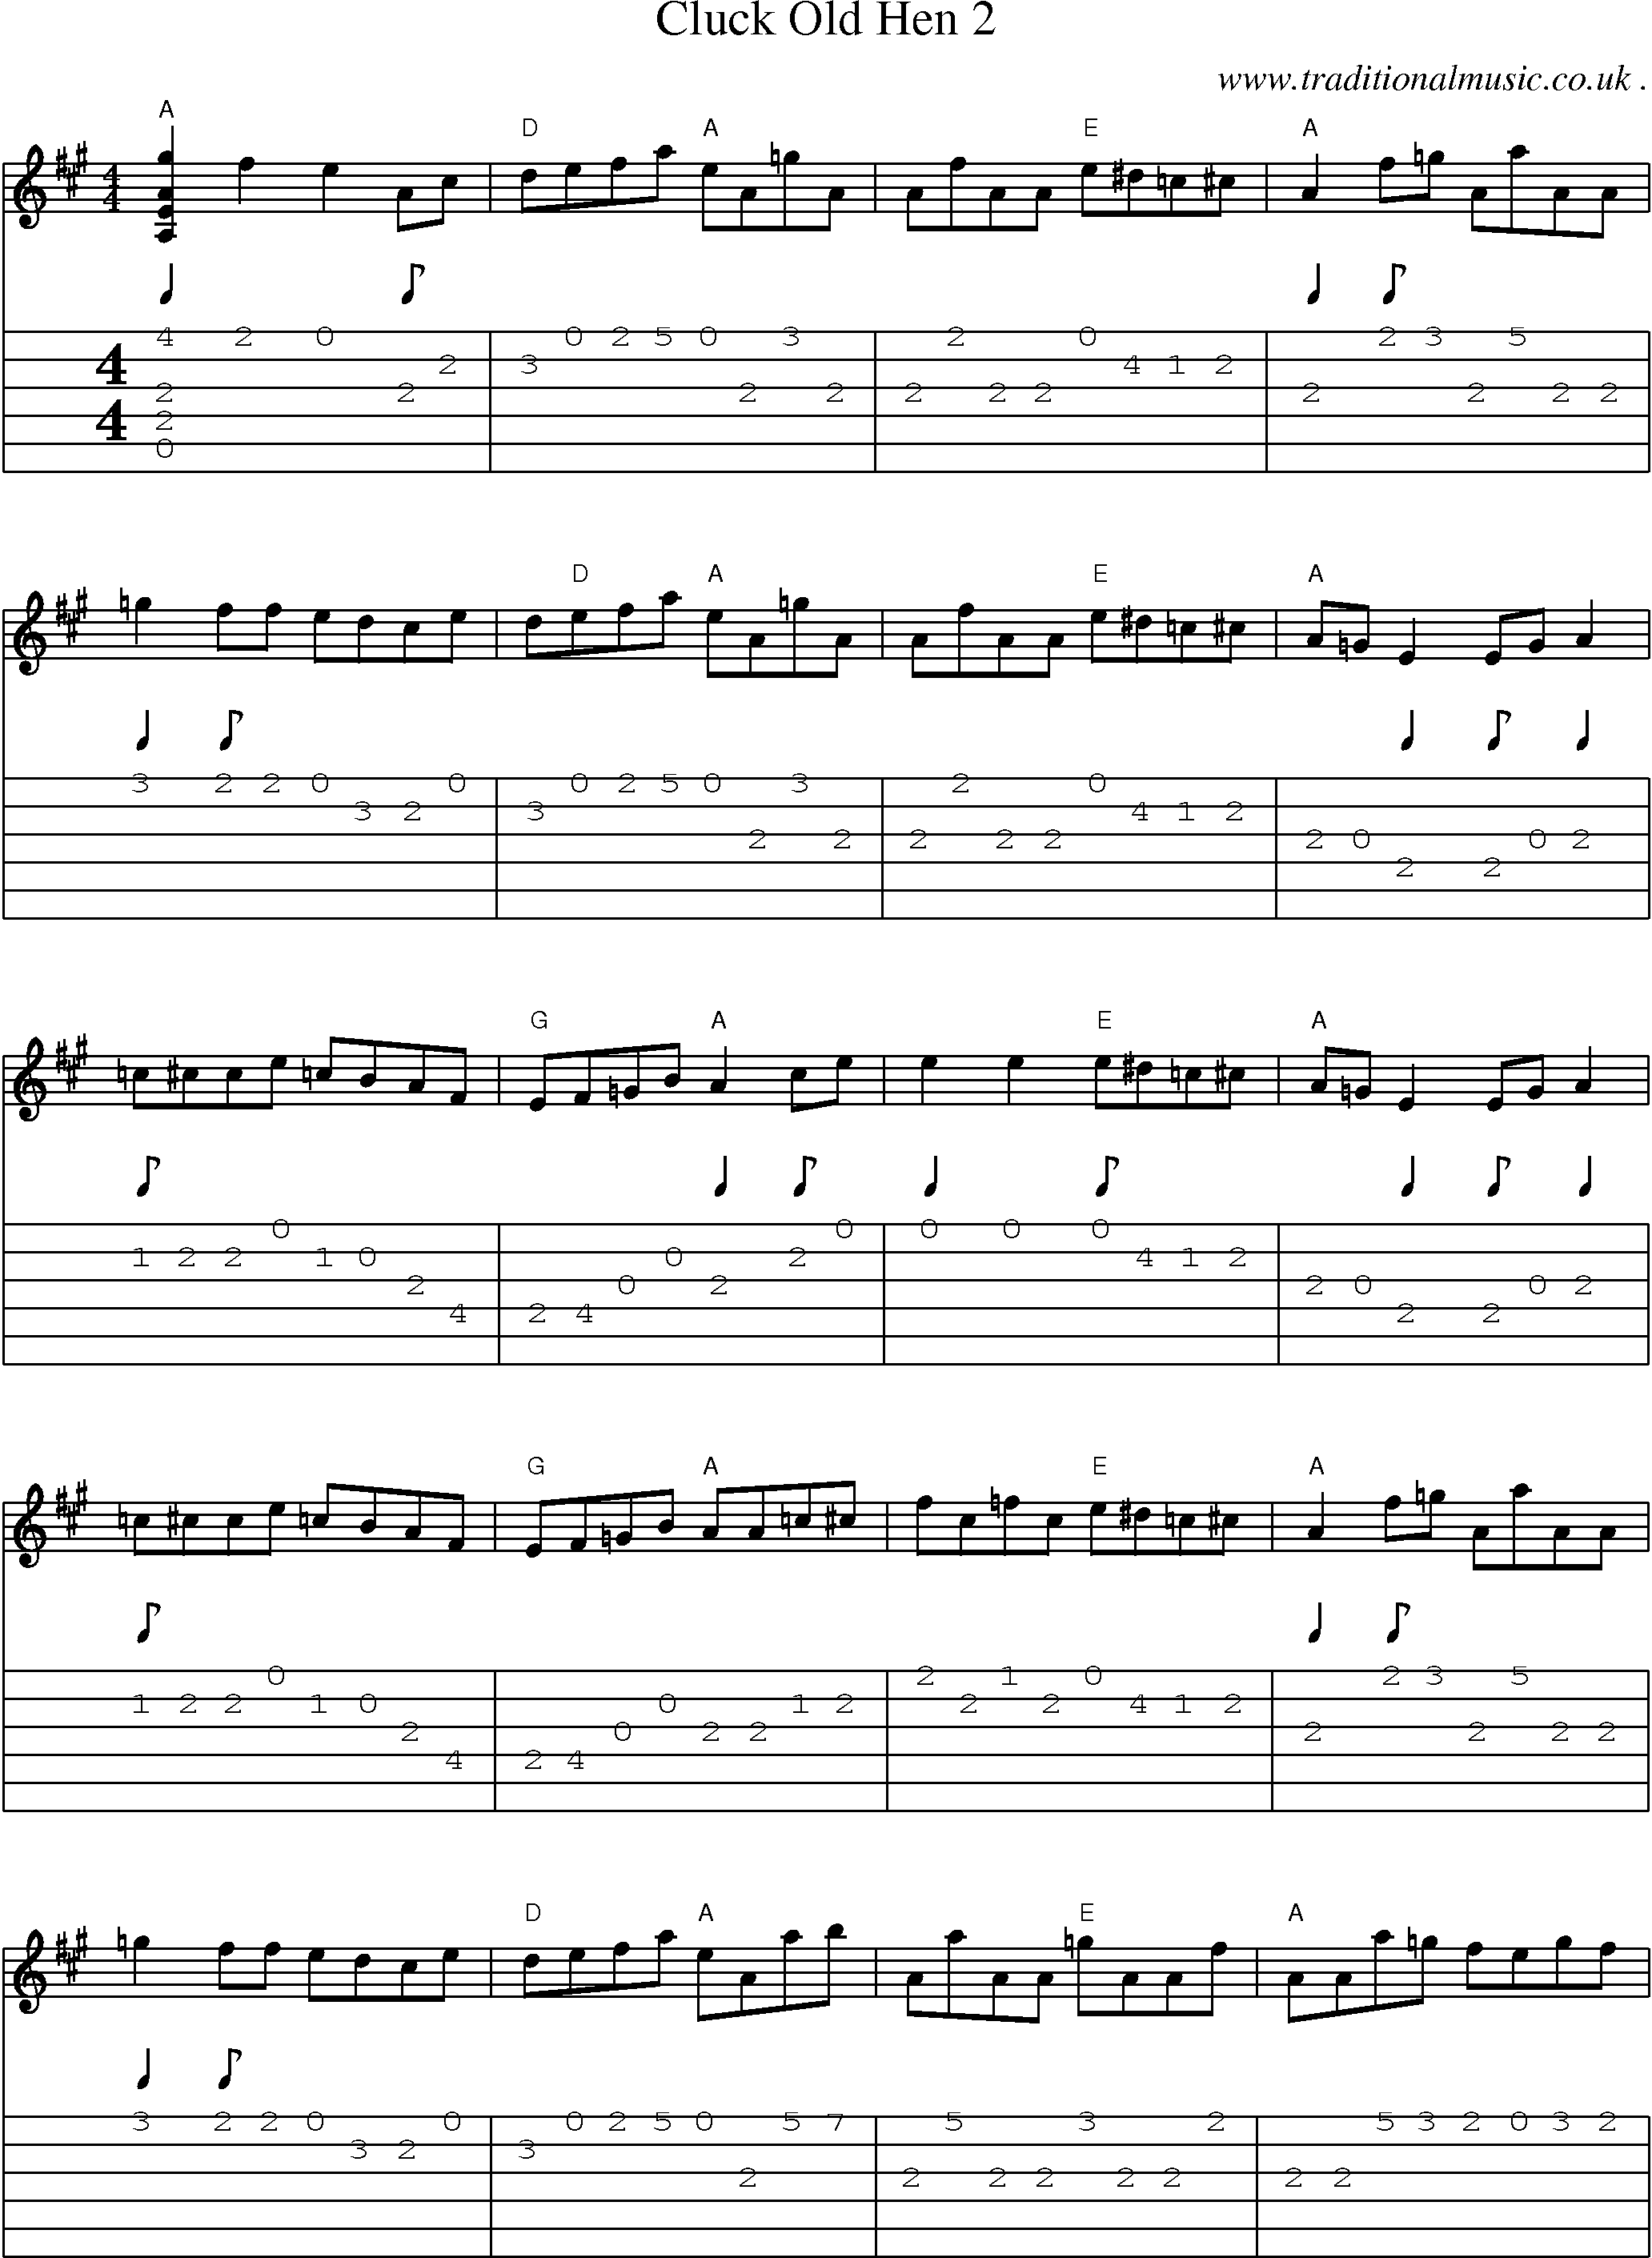 Music Score and Guitar Tabs for Cluck Old Hen 2